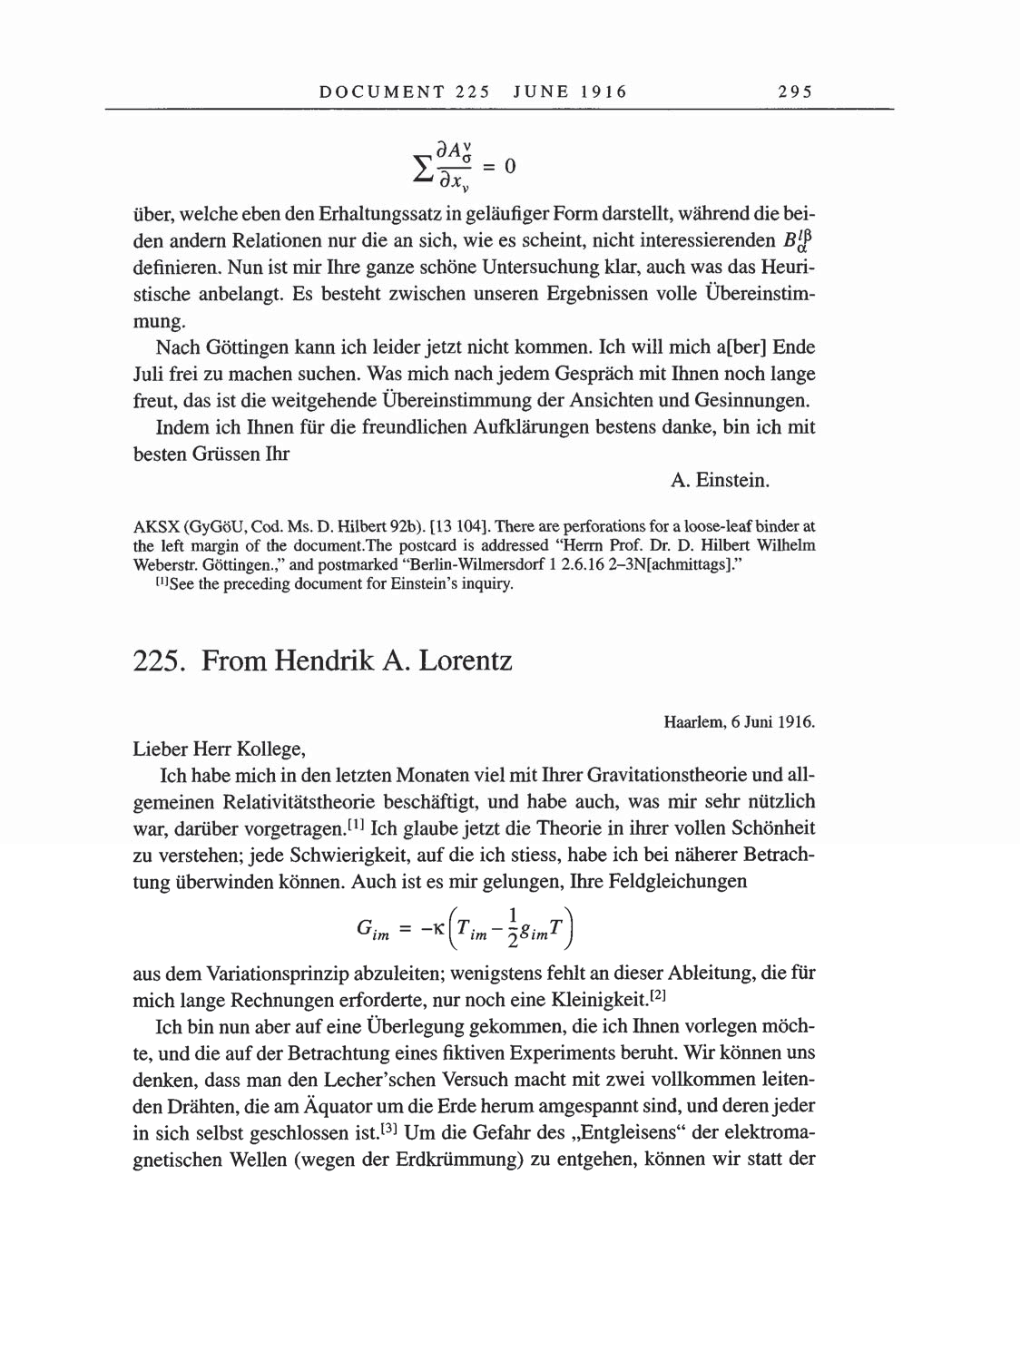 Volume 8, Part A: The Berlin Years: Correspondence 1914-1917 page 295